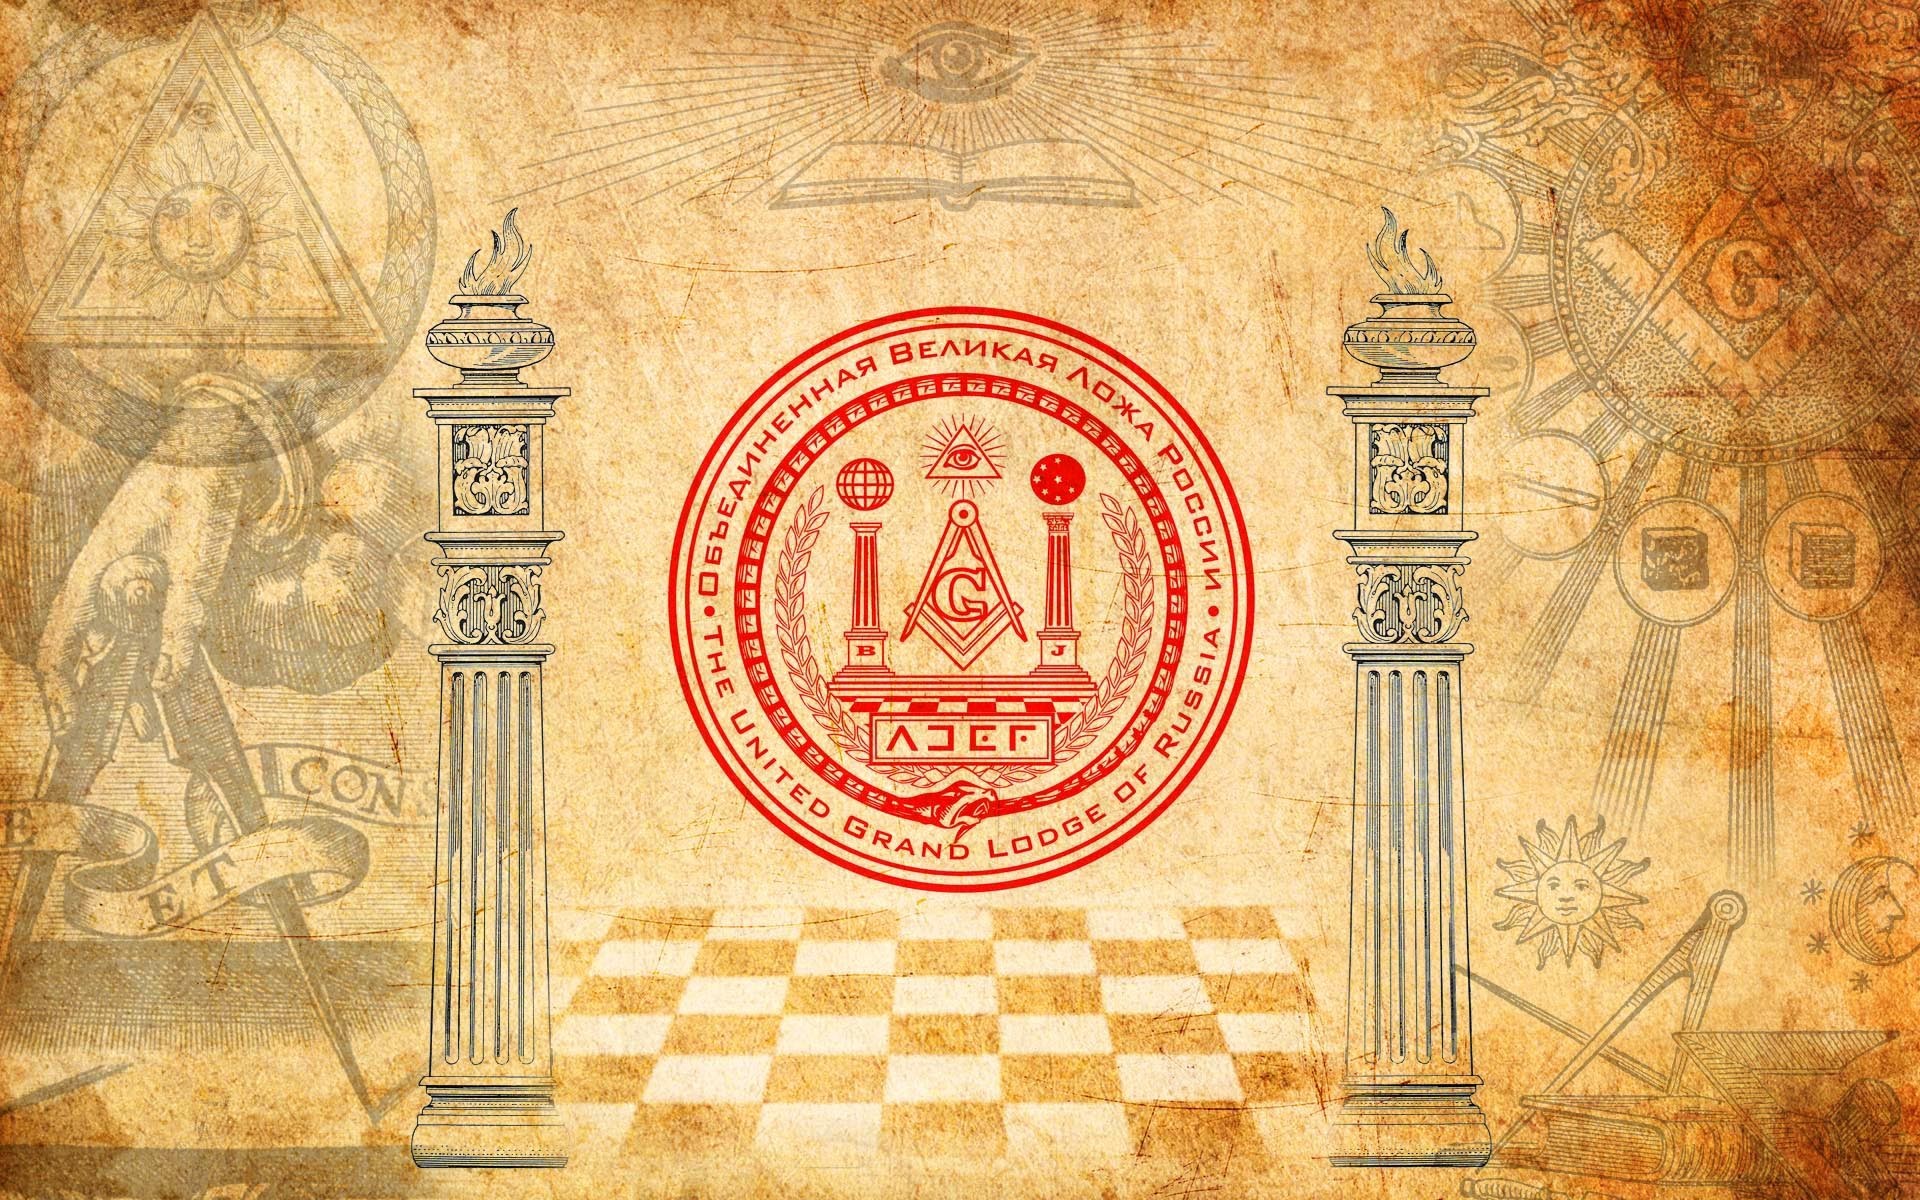 1920x1200 Lodge of Russia Wallpapers, Grand Lodge of Russia Myspace Backgrounds .